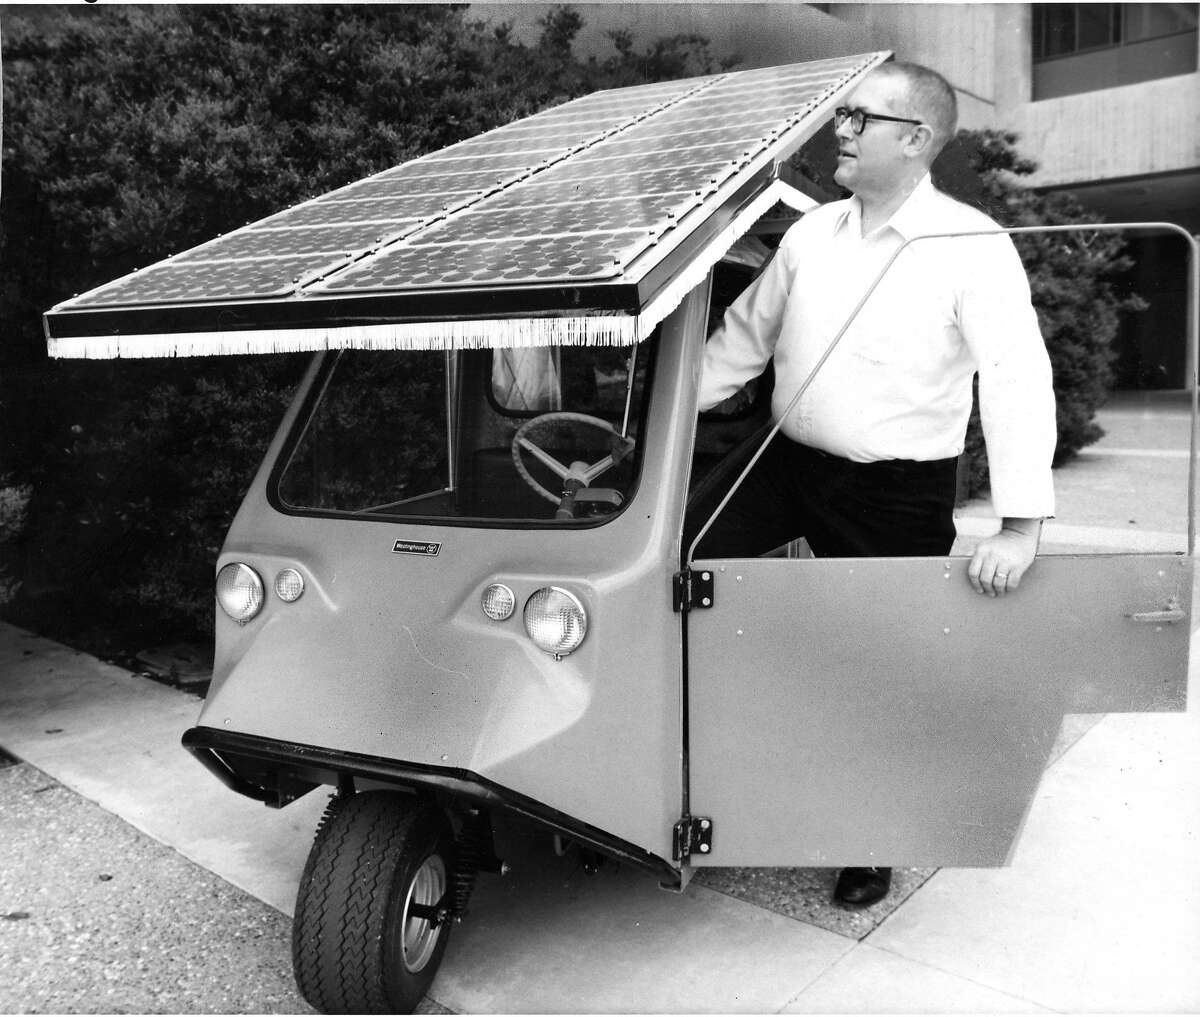 Guy Armantrout, a scientist at the Lawrence Livermore Laboratory, uses this solar surrey in 1978 to test the reliability of various solar cells.